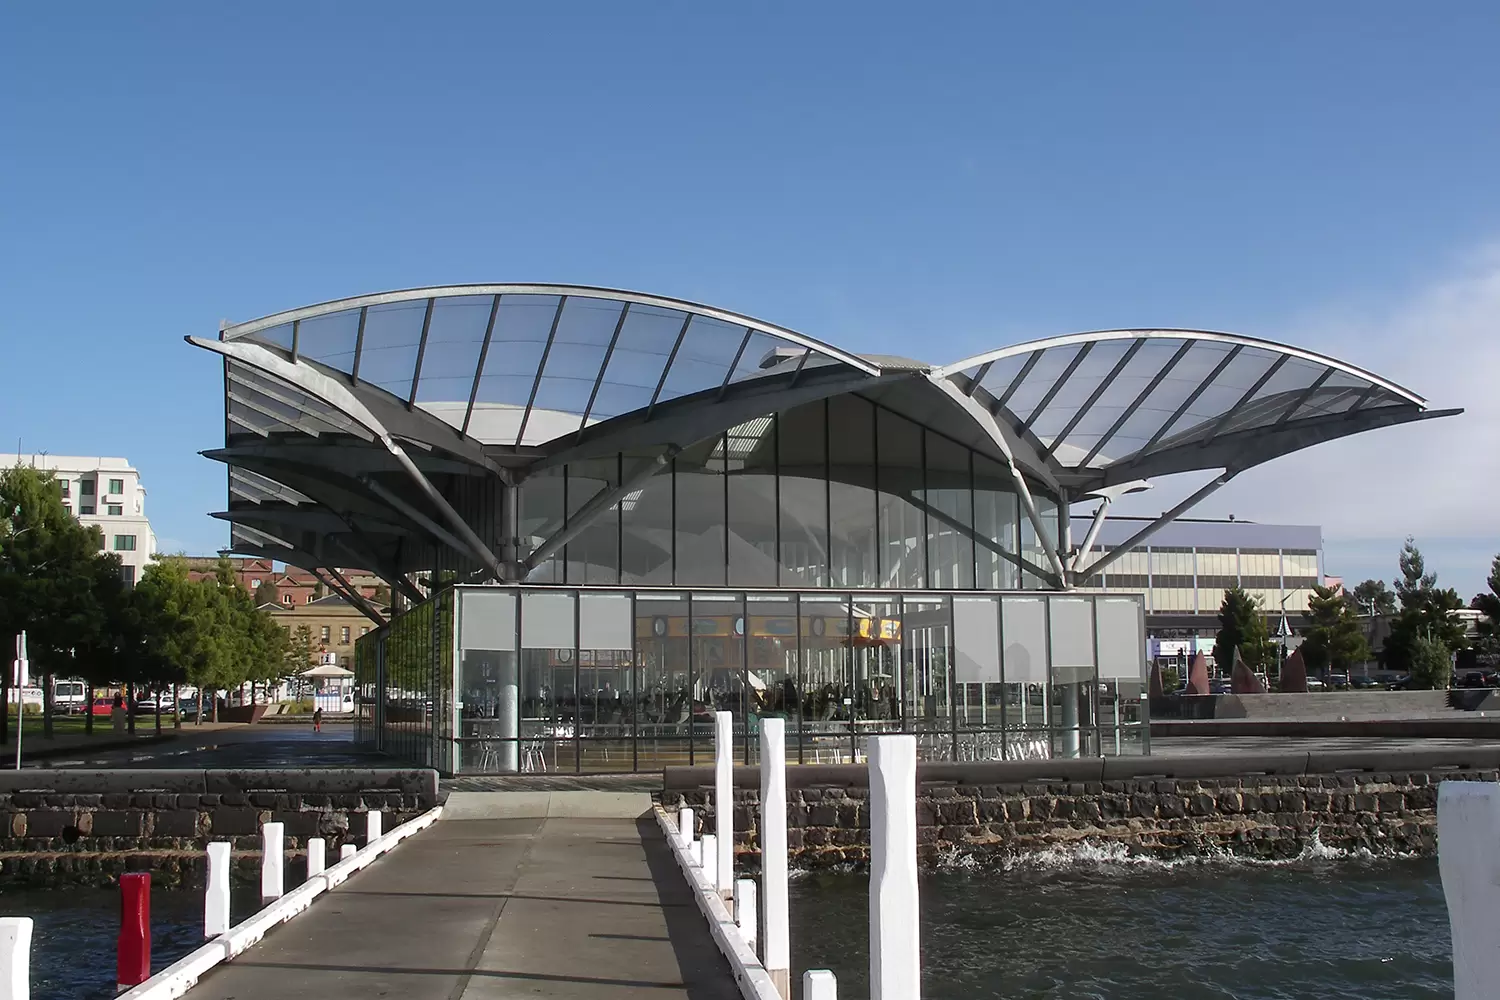 The Carousel building in Geelong used galvanized steel for protection in a sheltered marine bay environment.